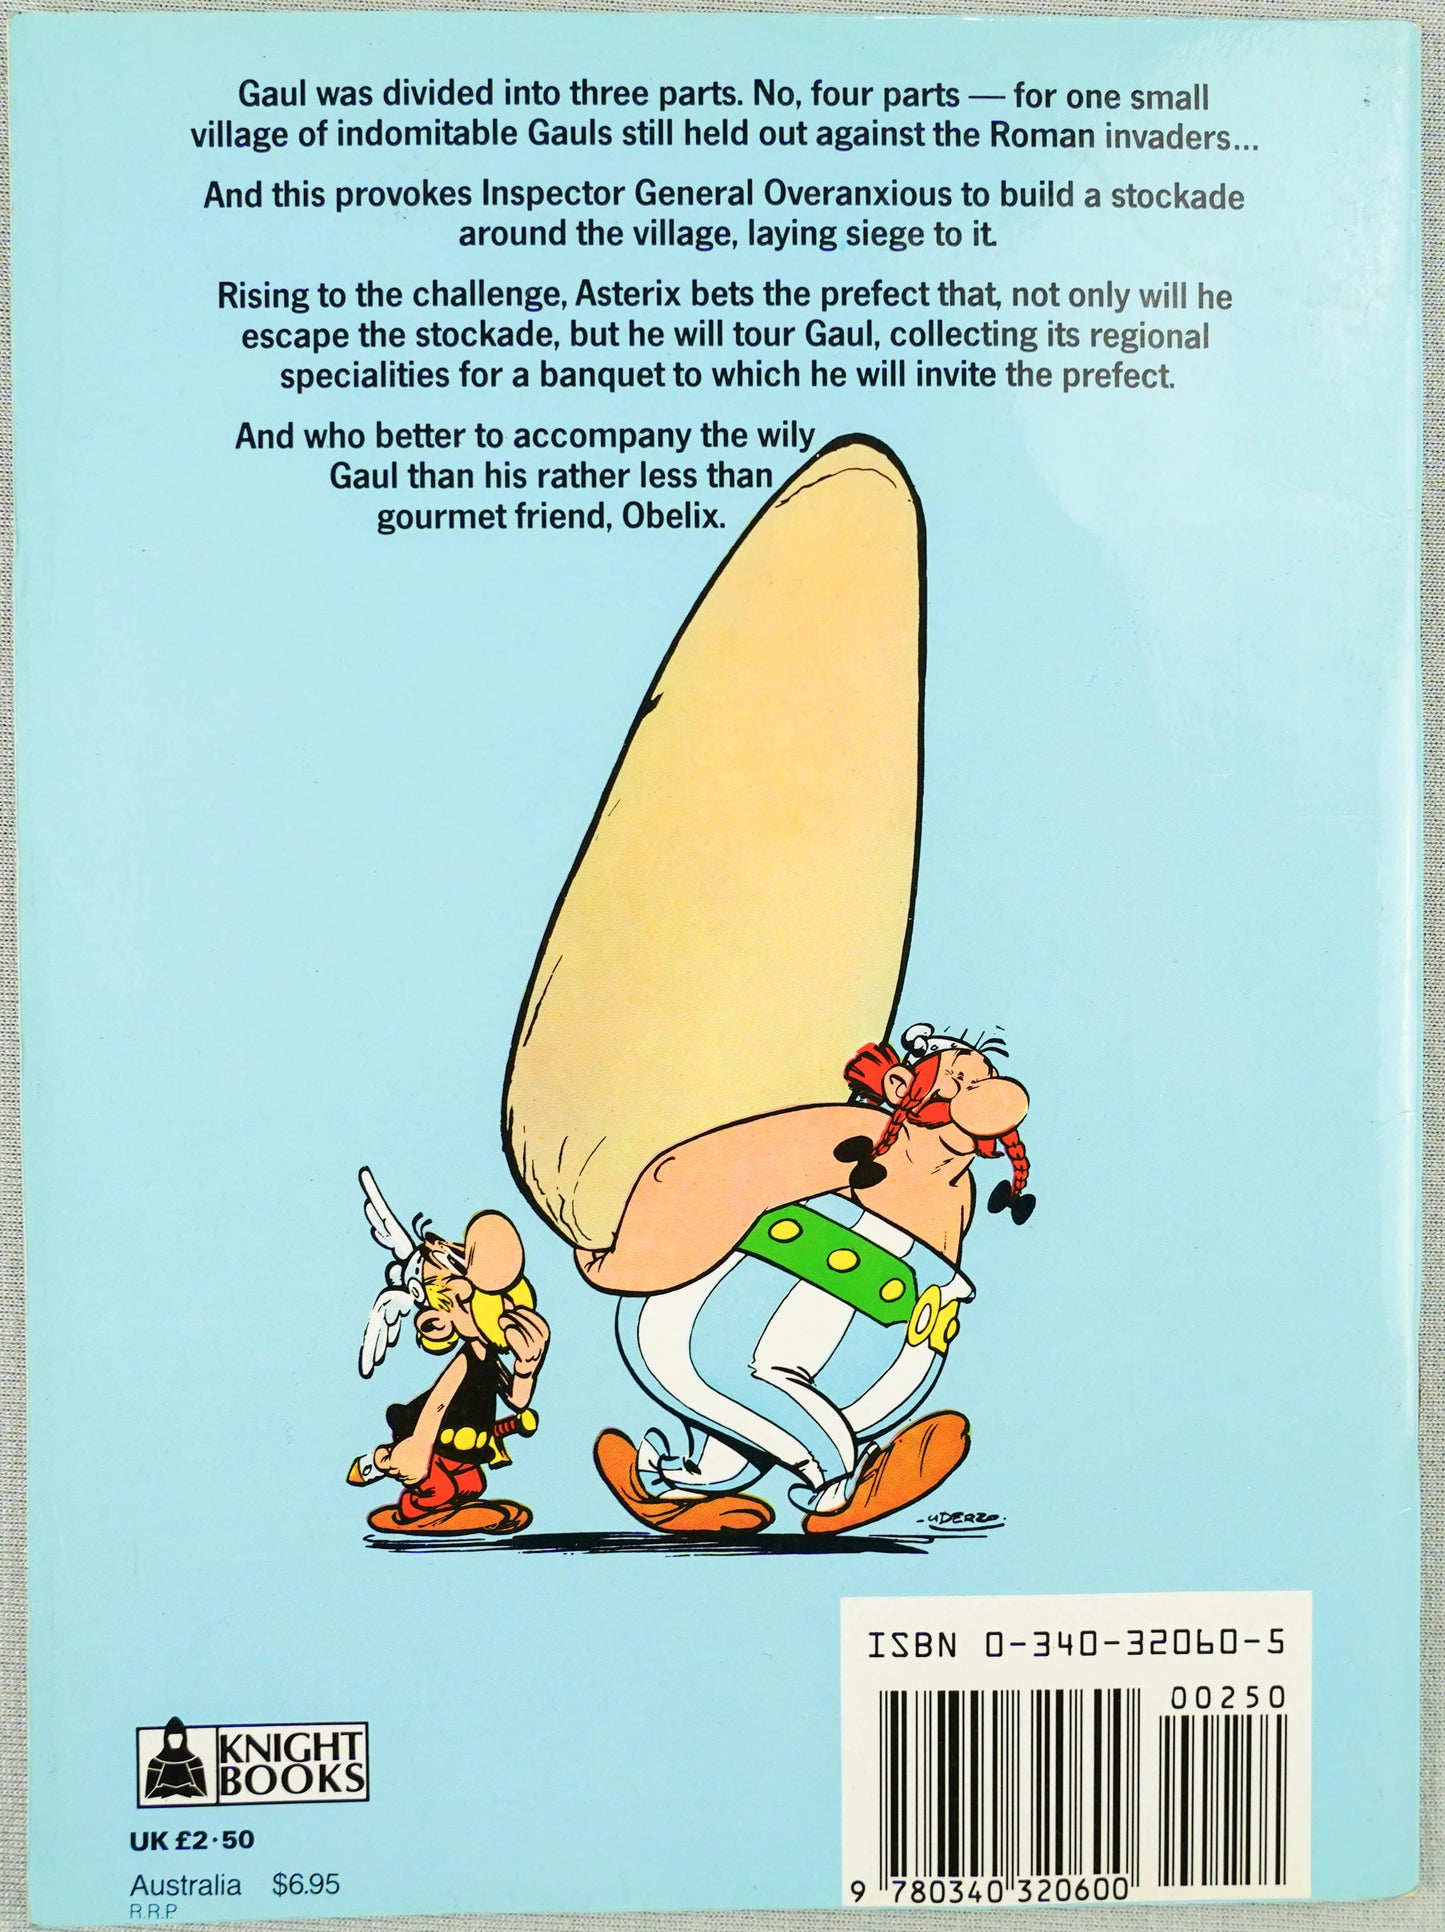 Asterix and the Banquet Vintage Mini A5 Asterix Book UK Paperback Edition Uderzo